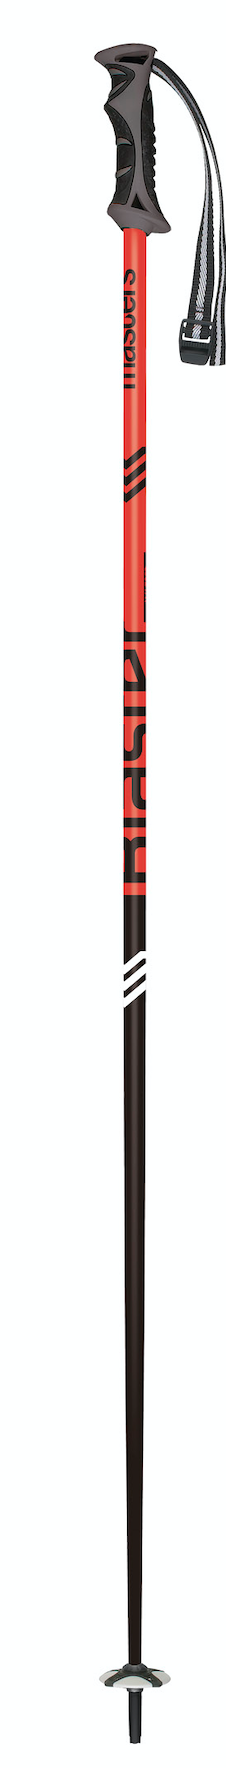 Blaster All-Mtn ski poles by Masters (2 colors) on World Cup Ski Shop 3